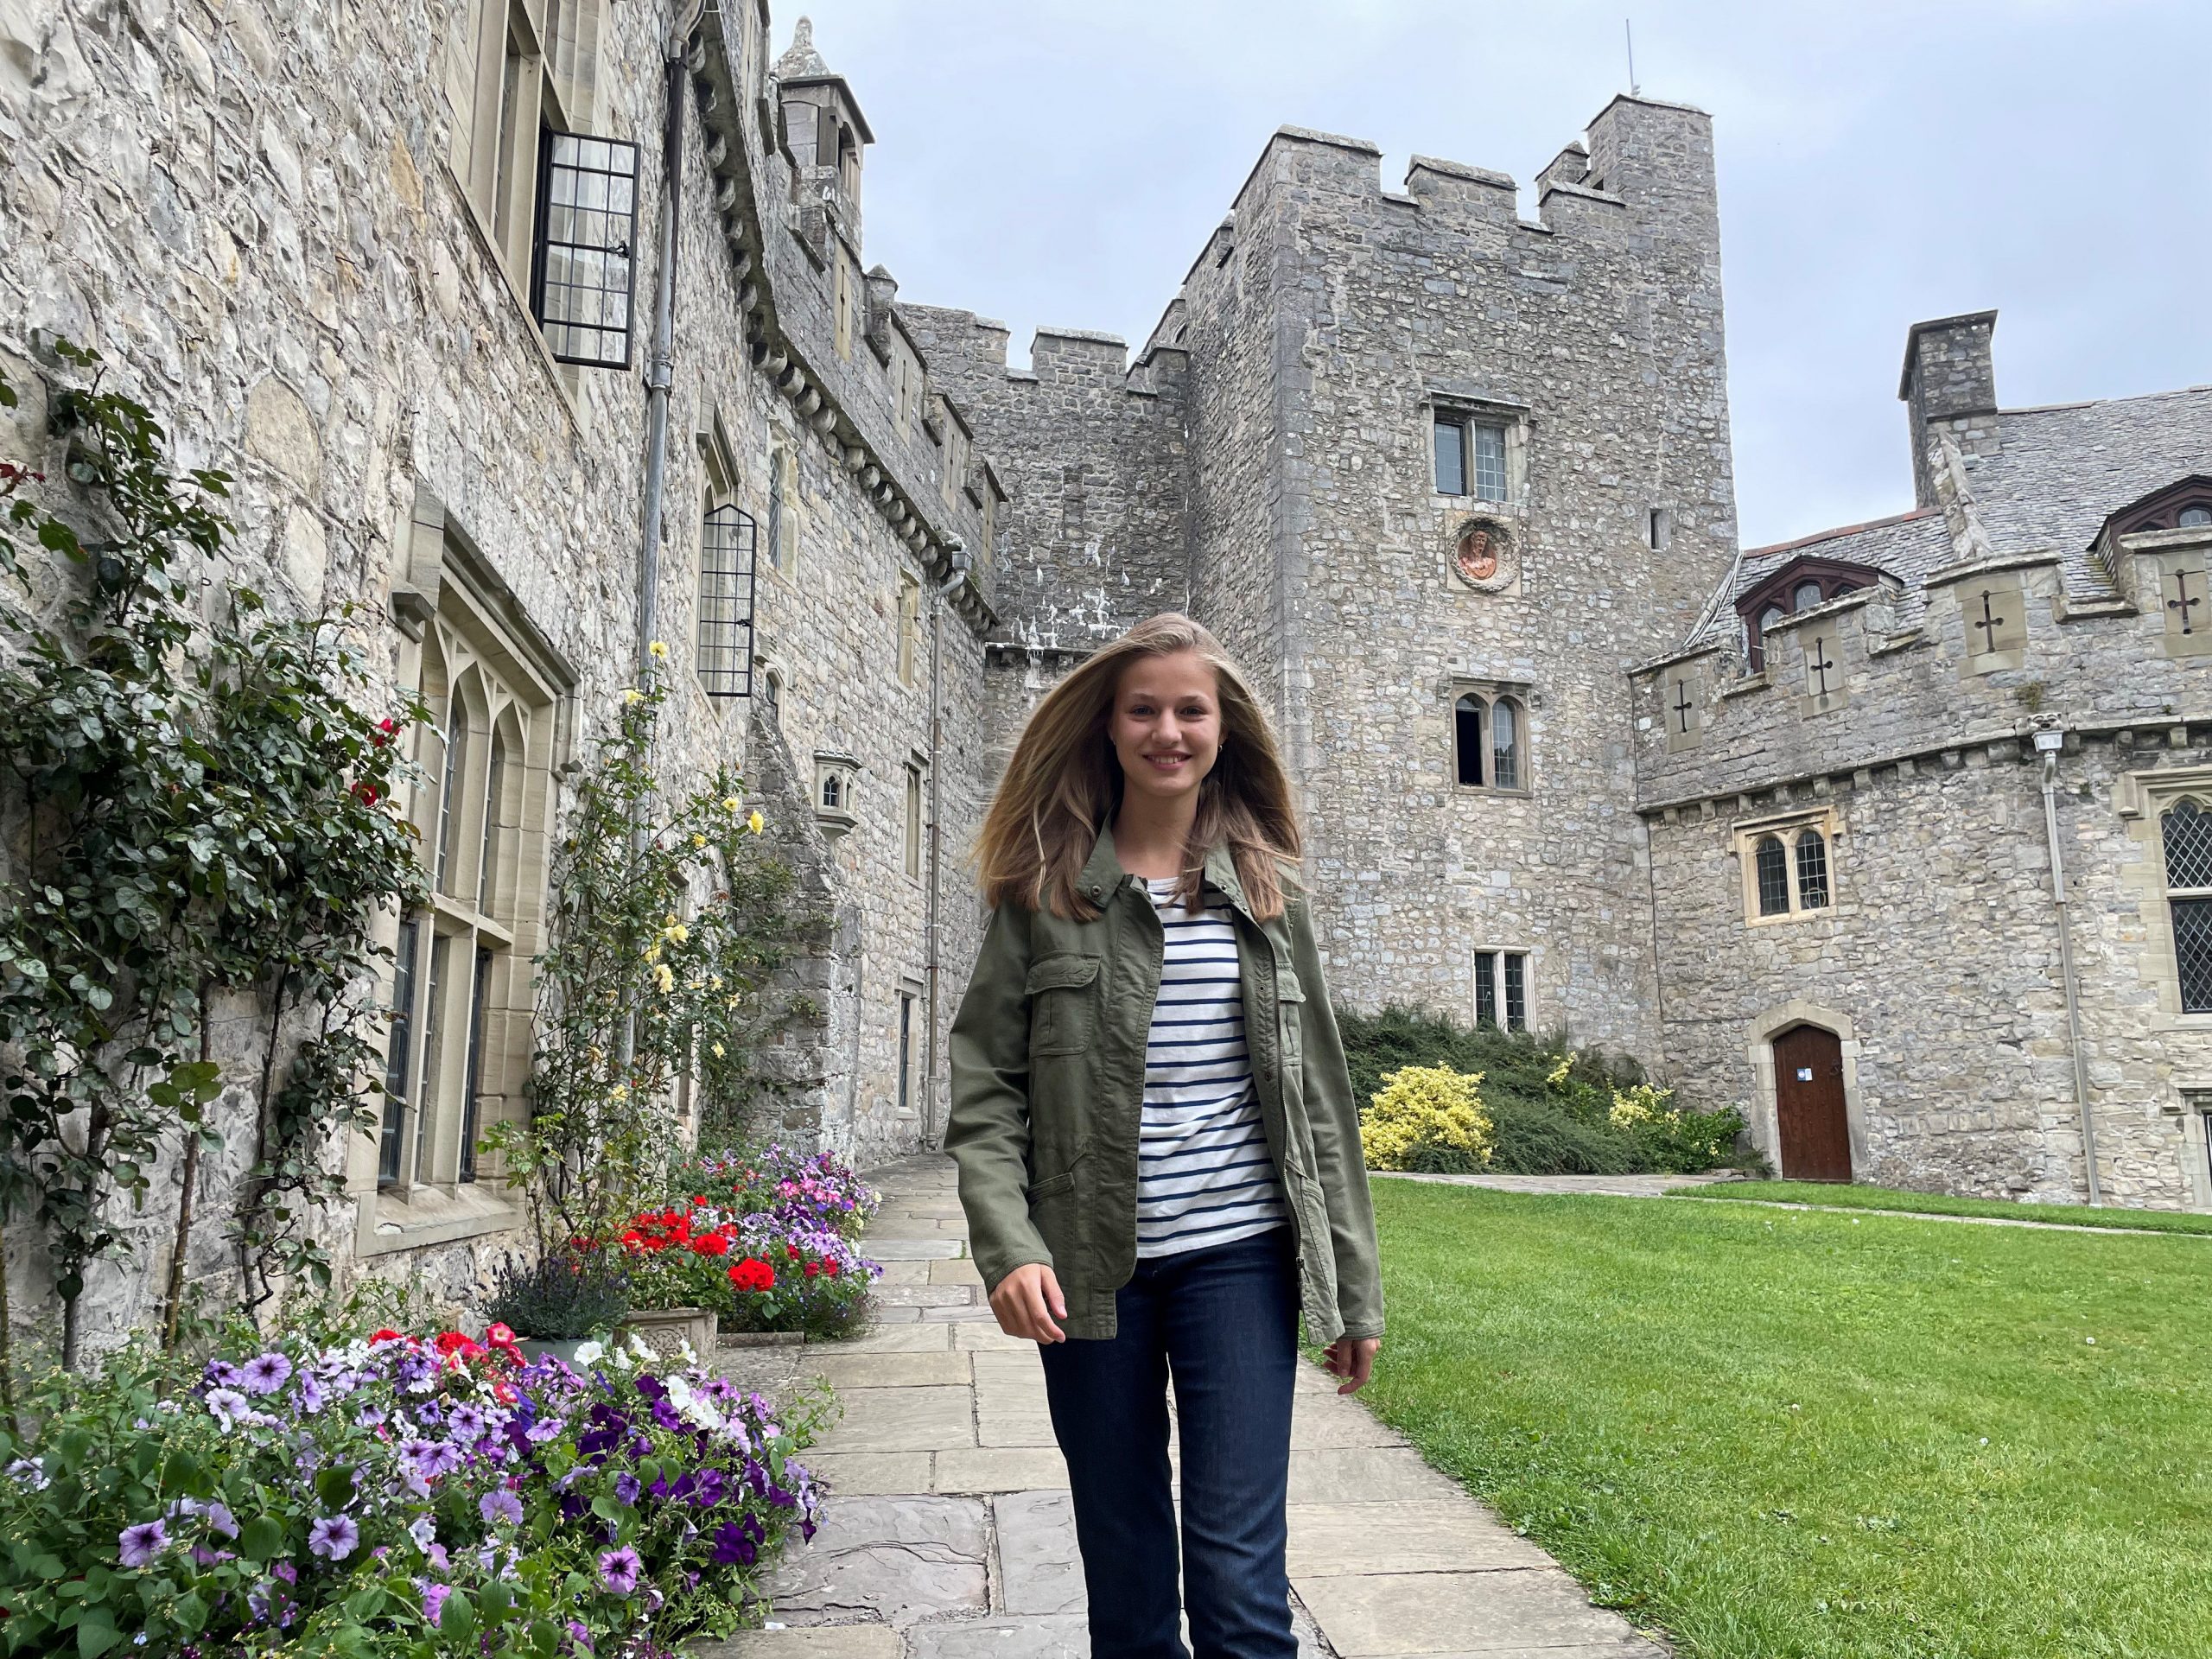 Pincess Of Asturias Leonor De Borbon During Her First Day At Uwc Atlantic College In Llantwit Major, Wales 30 August 2021